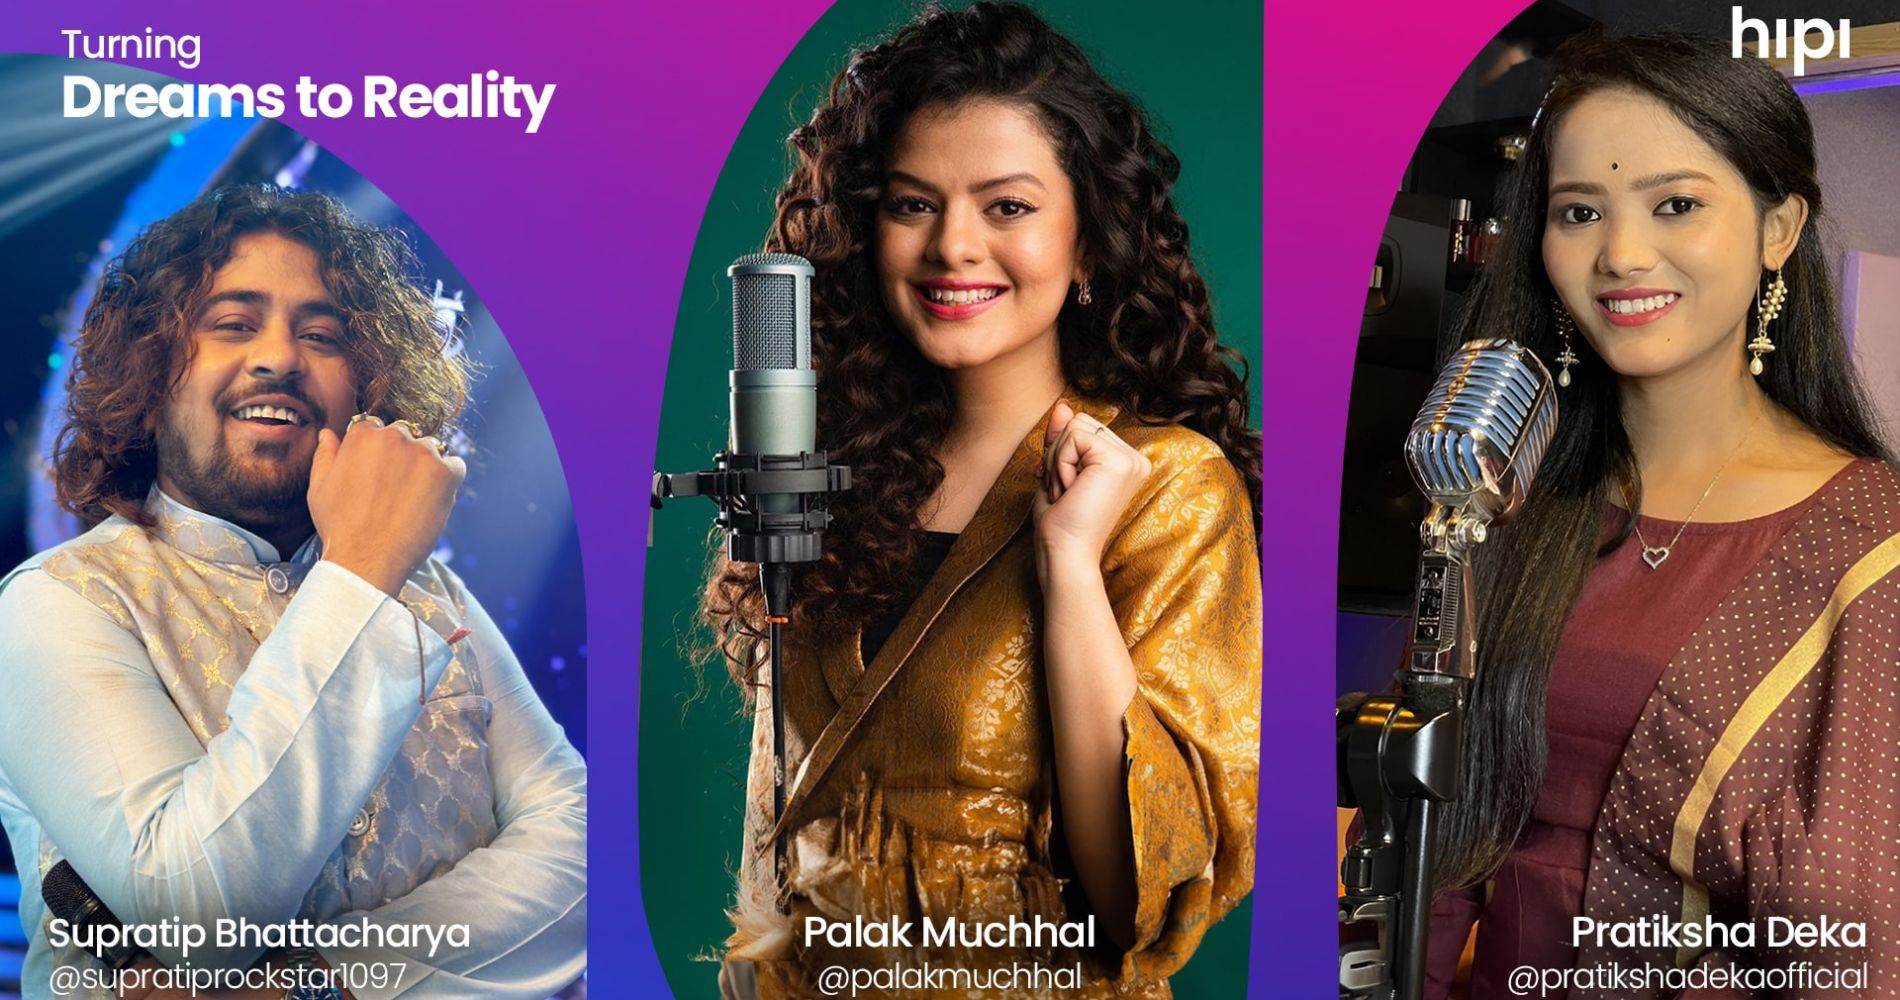 Hipi's Duet Delight: Palak Muchhal Joins Two Talented Creators For